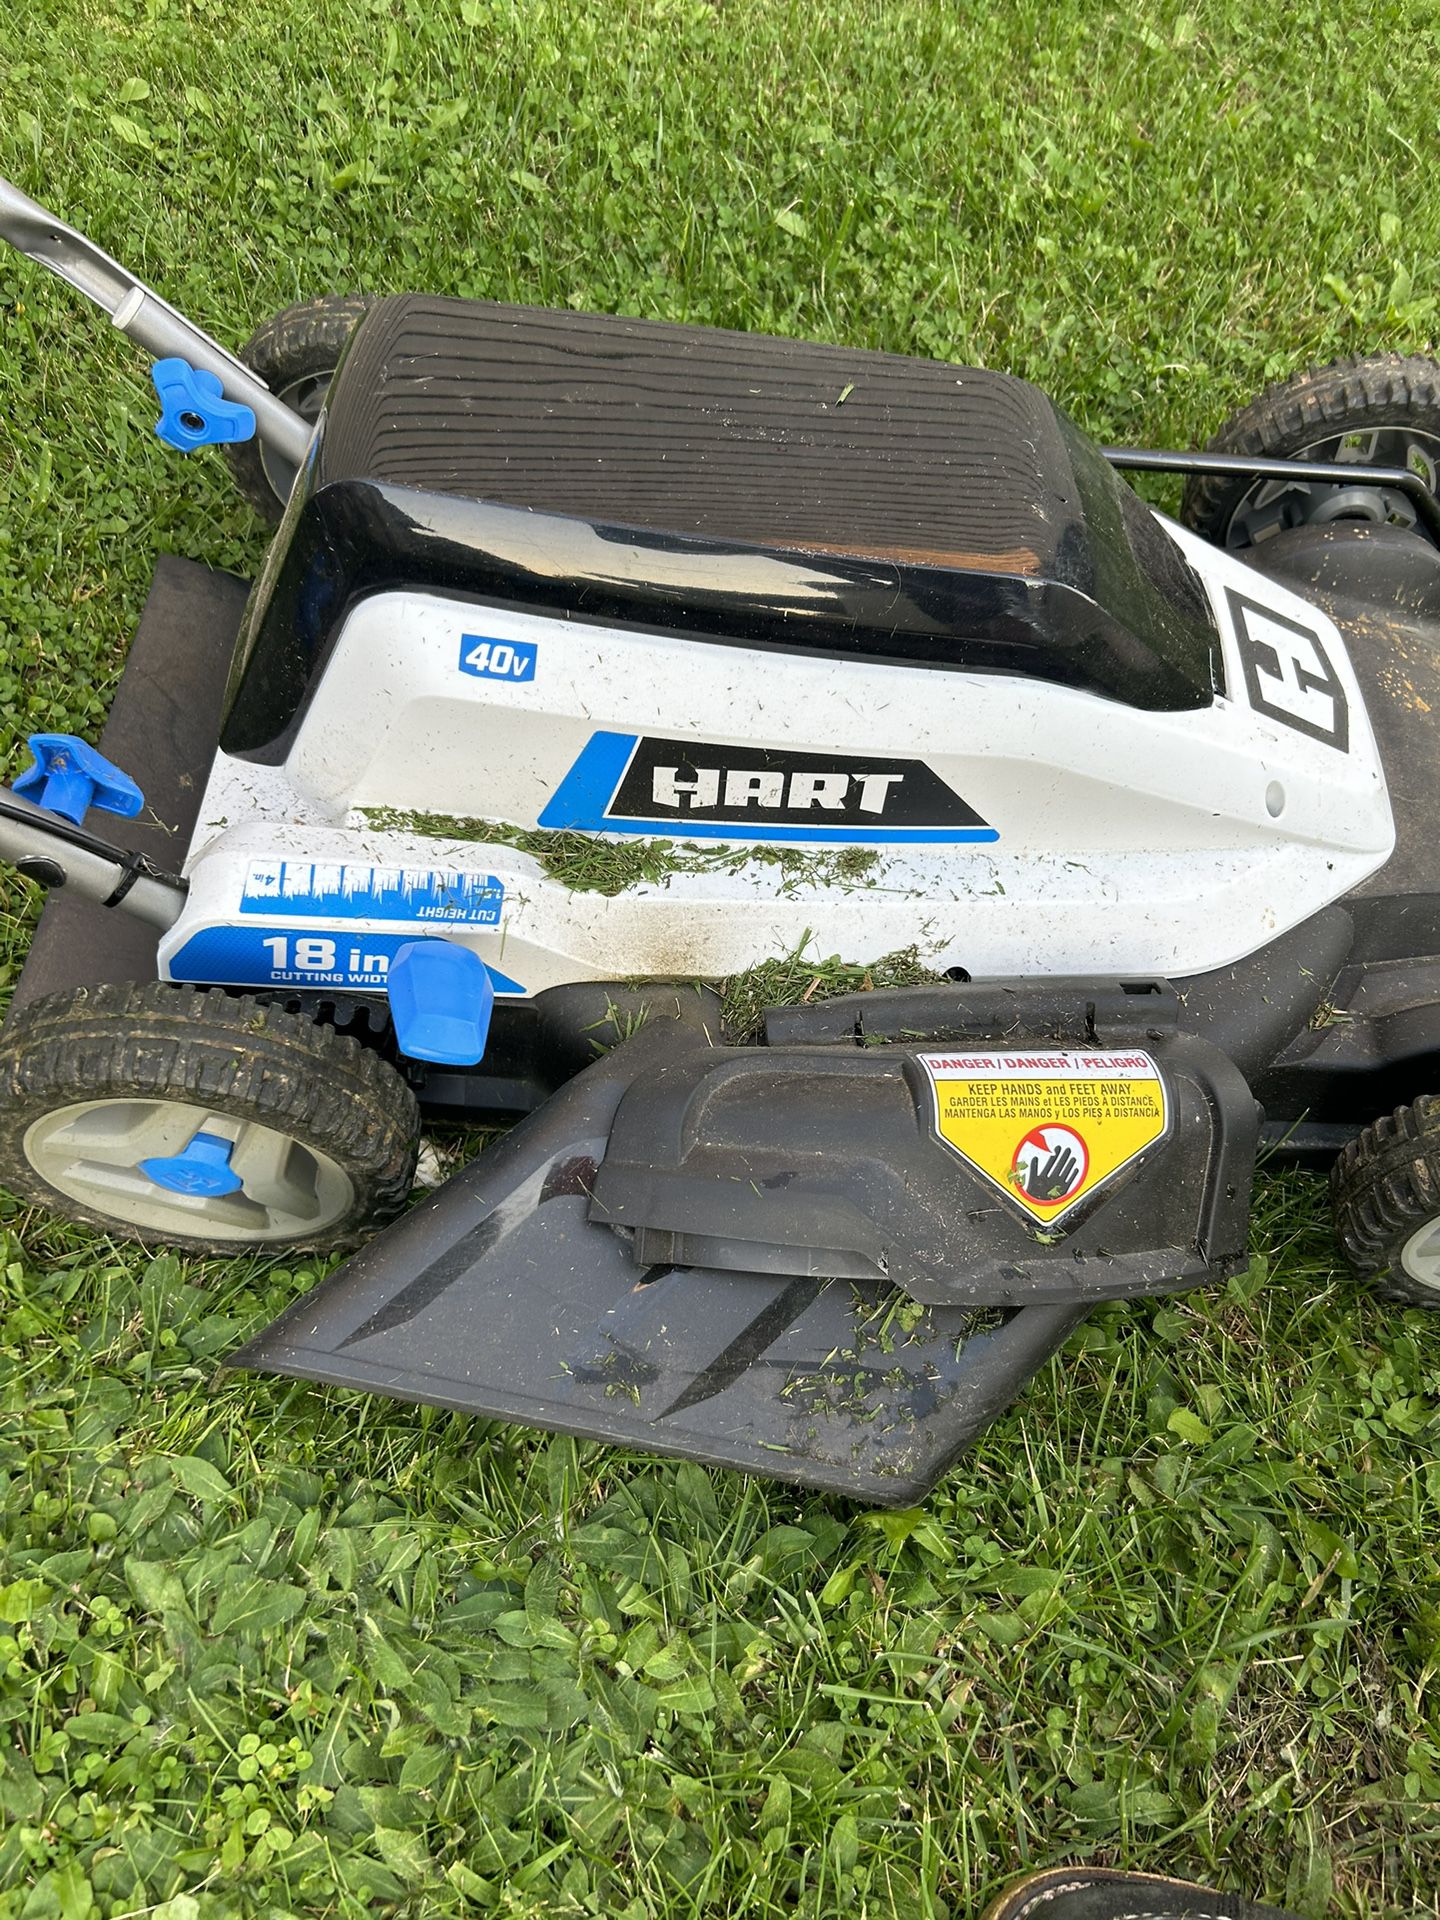 A Hart Electric Lawn Mower 